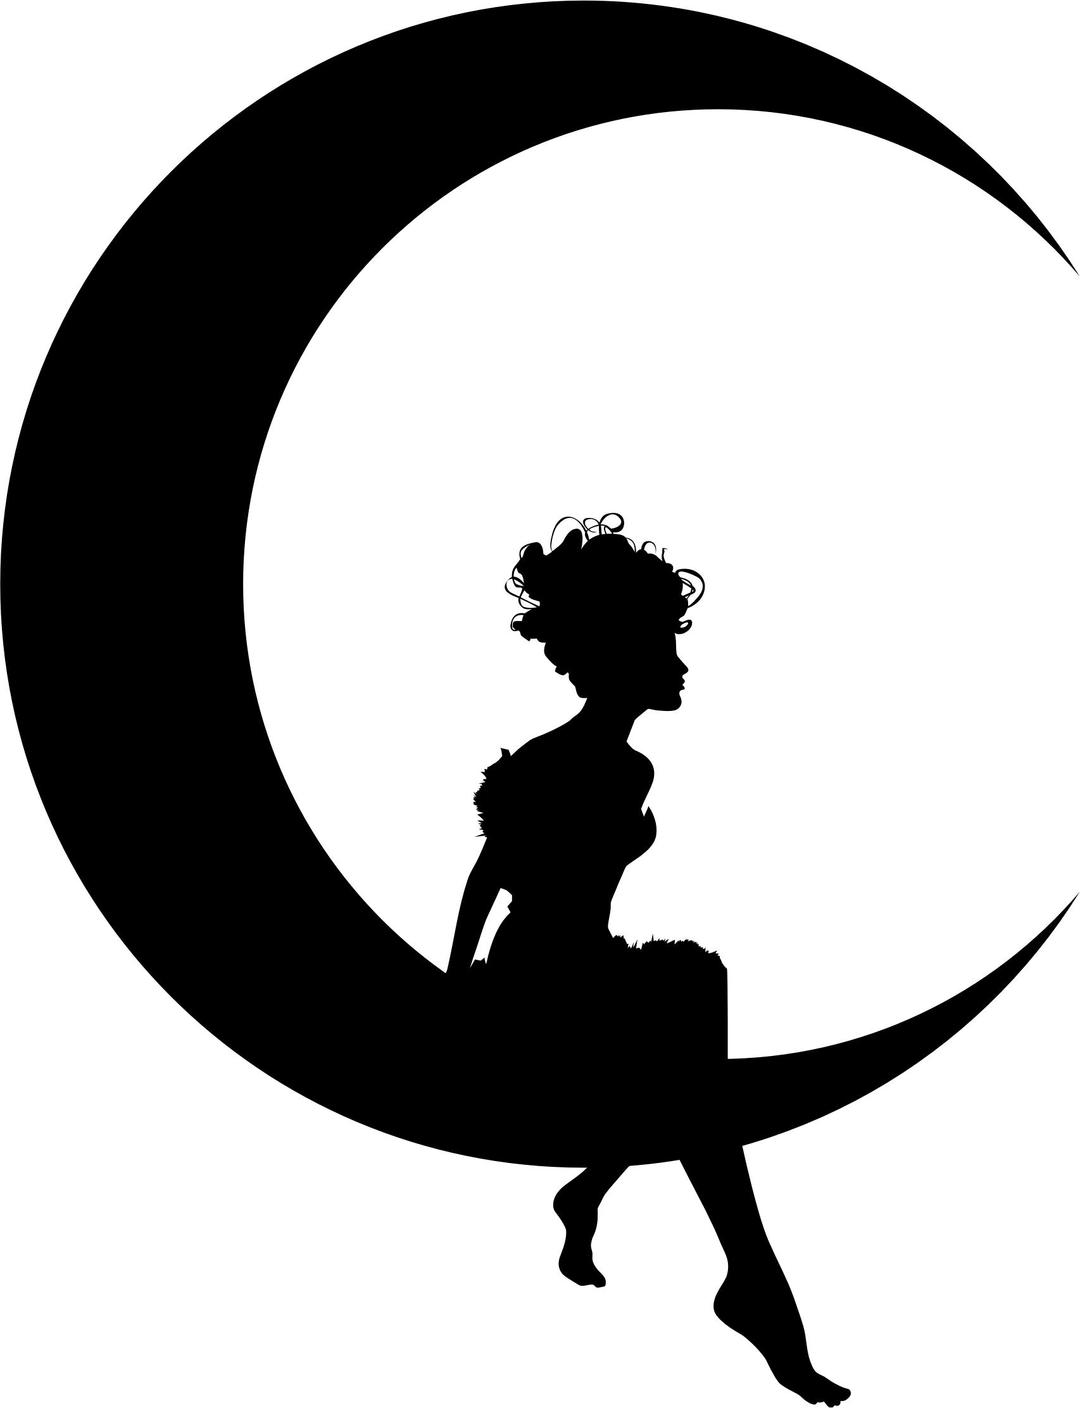 Fairy Sitting On Crescent Moon Silhouette png transparent